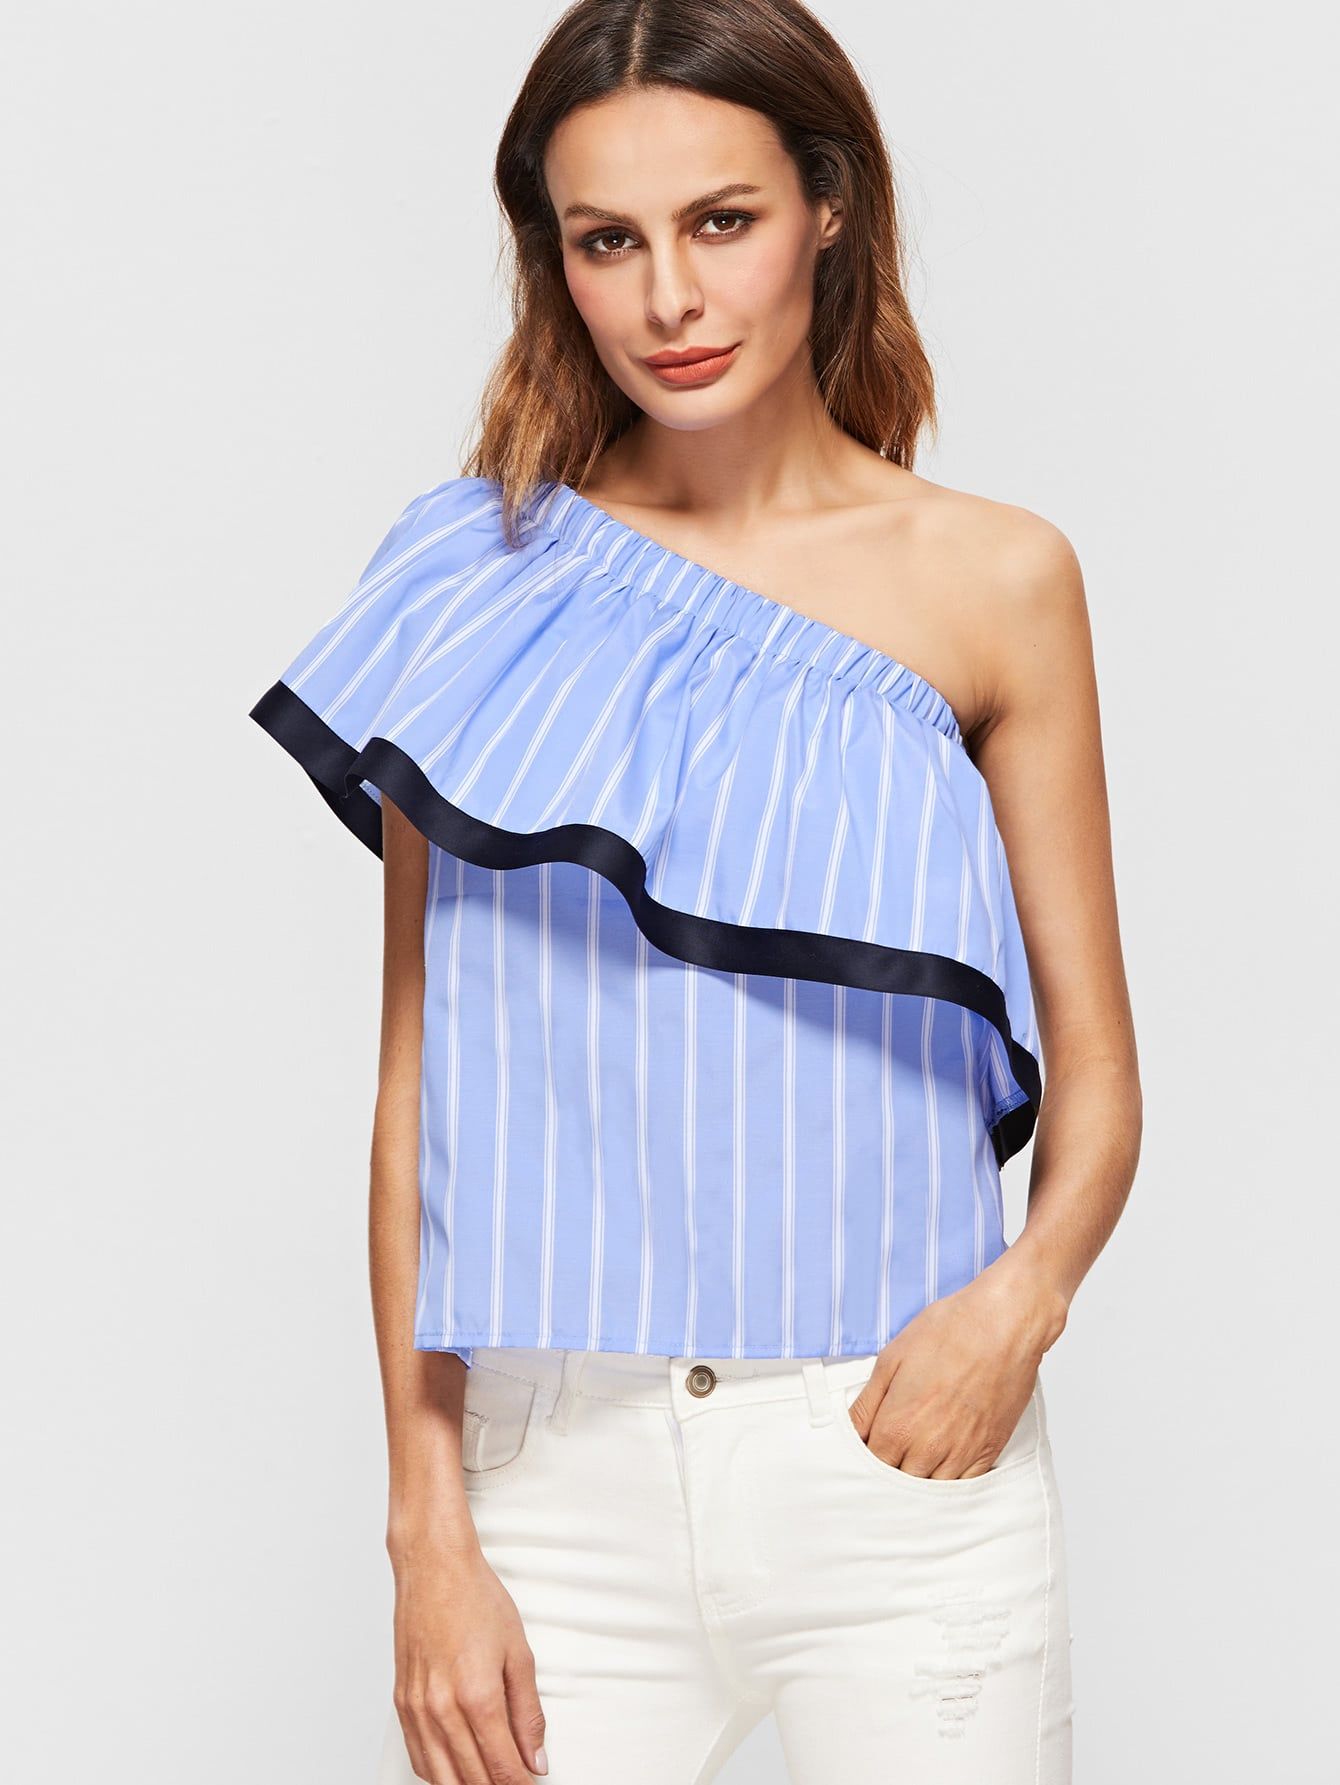 Blue And White Striped Contrast Trim One Shoulder Ruffle Top | SHEIN